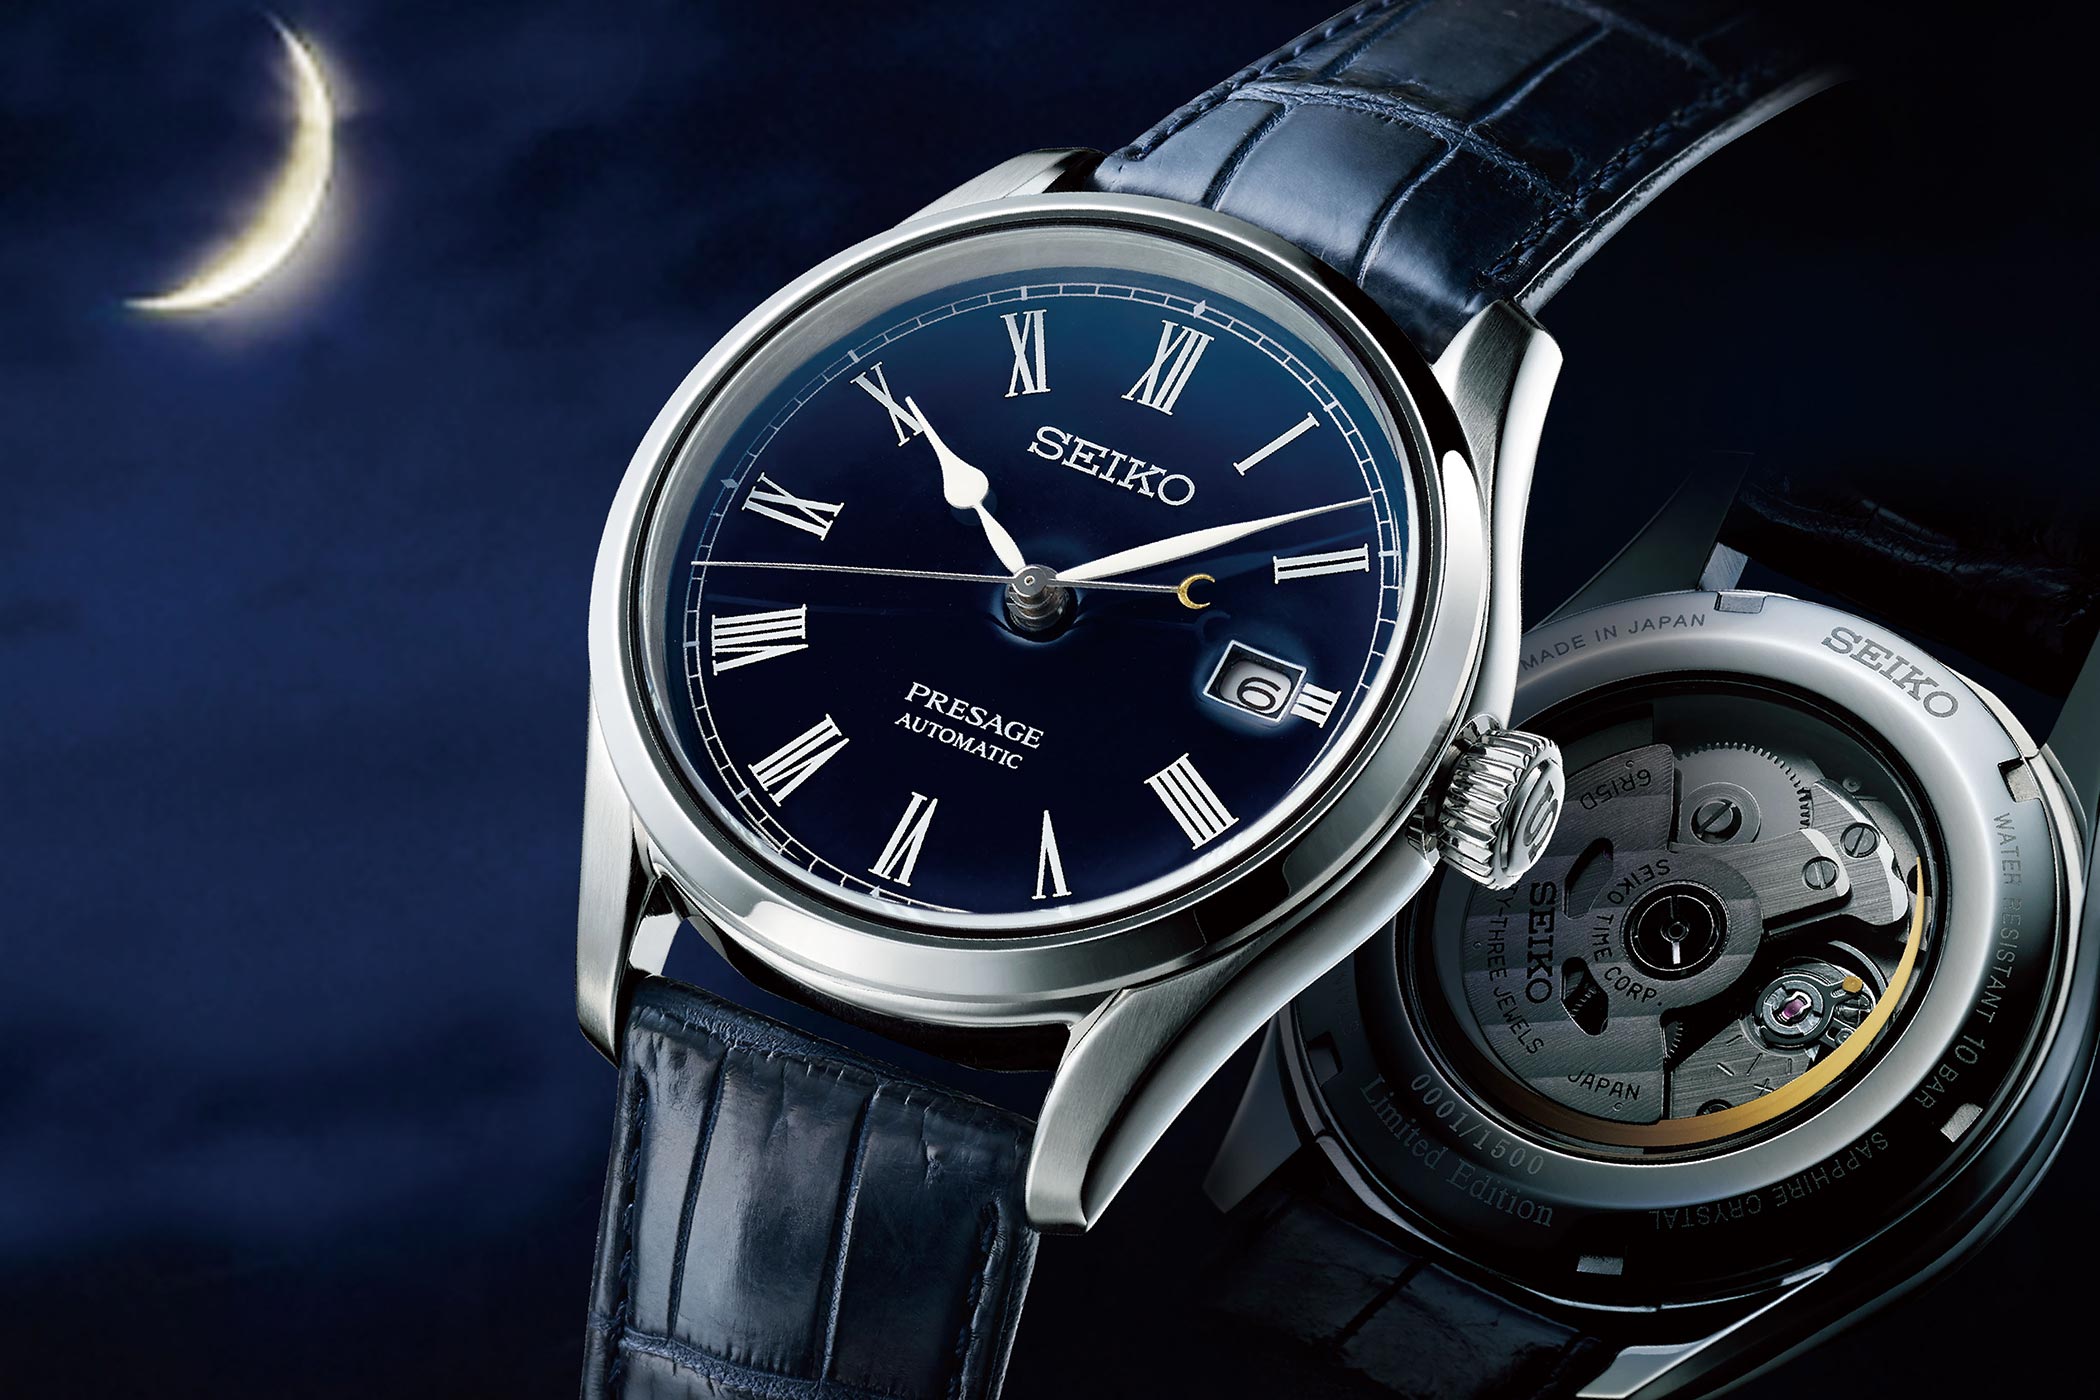 Introducing The Limited Edition Seiko With Blue Enamel Dial - Monochrome